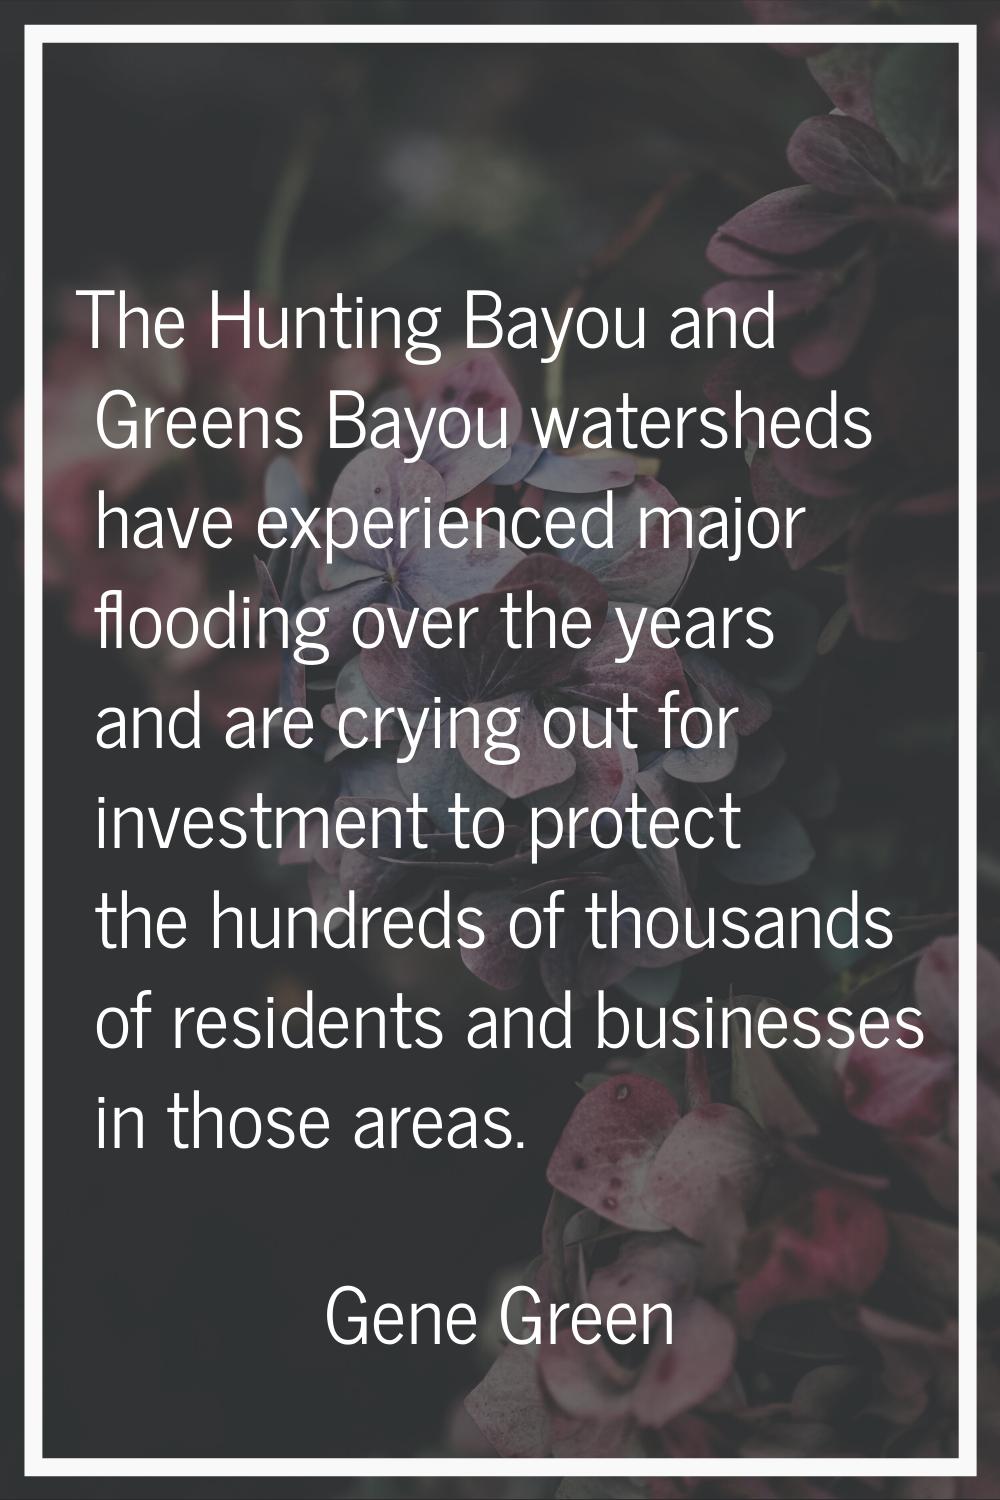 The Hunting Bayou and Greens Bayou watersheds have experienced major flooding over the years and ar